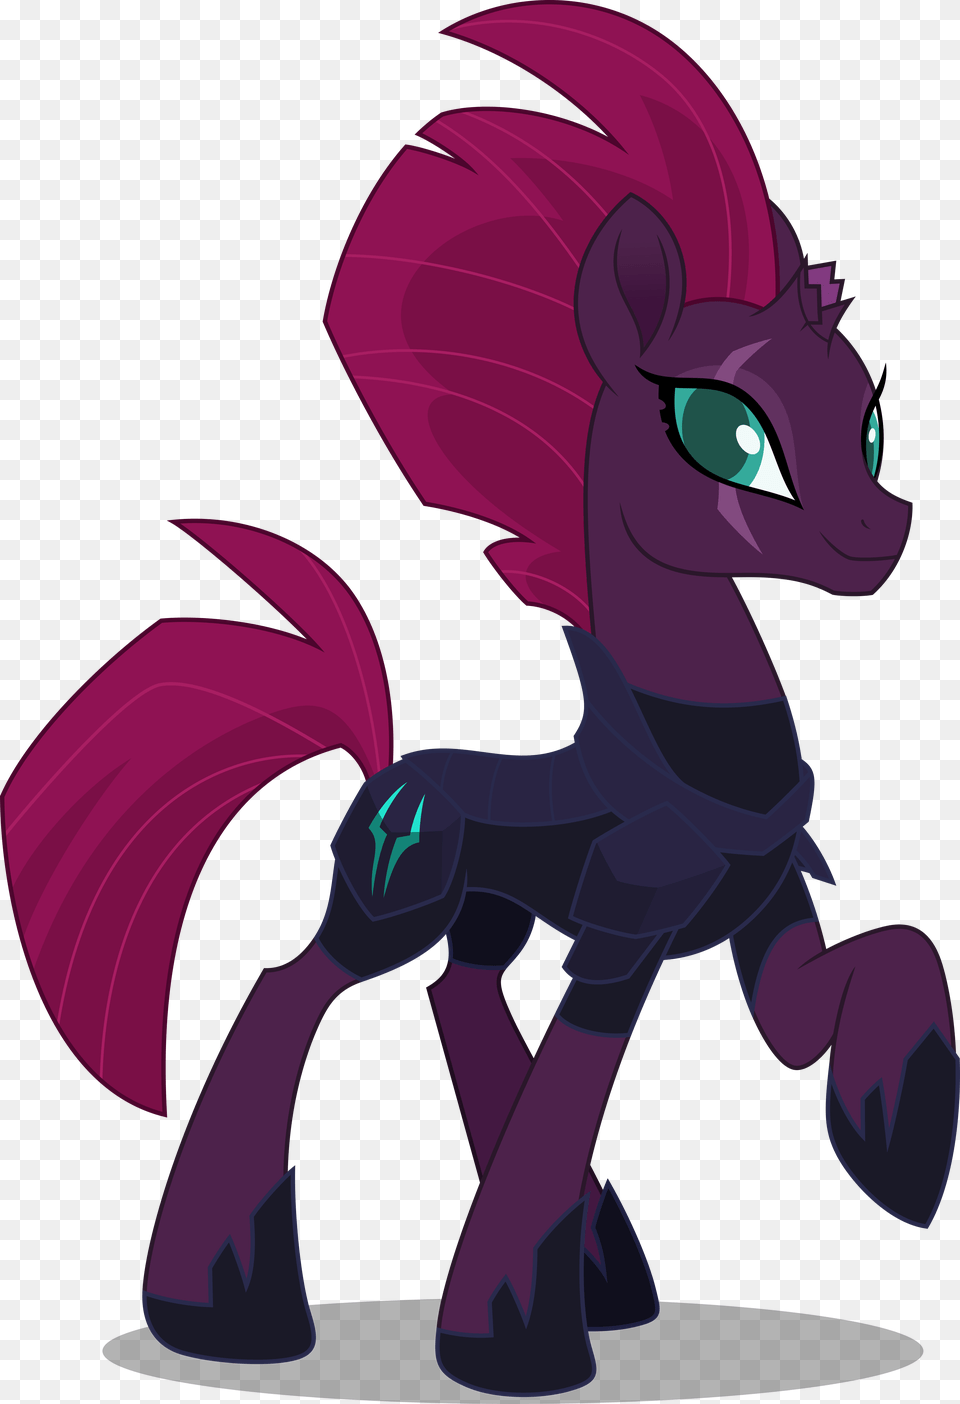 Tempest Shadow My Little Pony Twilight Sparkle Drawing Tempest My Little Pony, Cartoon, Book, Comics, Publication Png Image